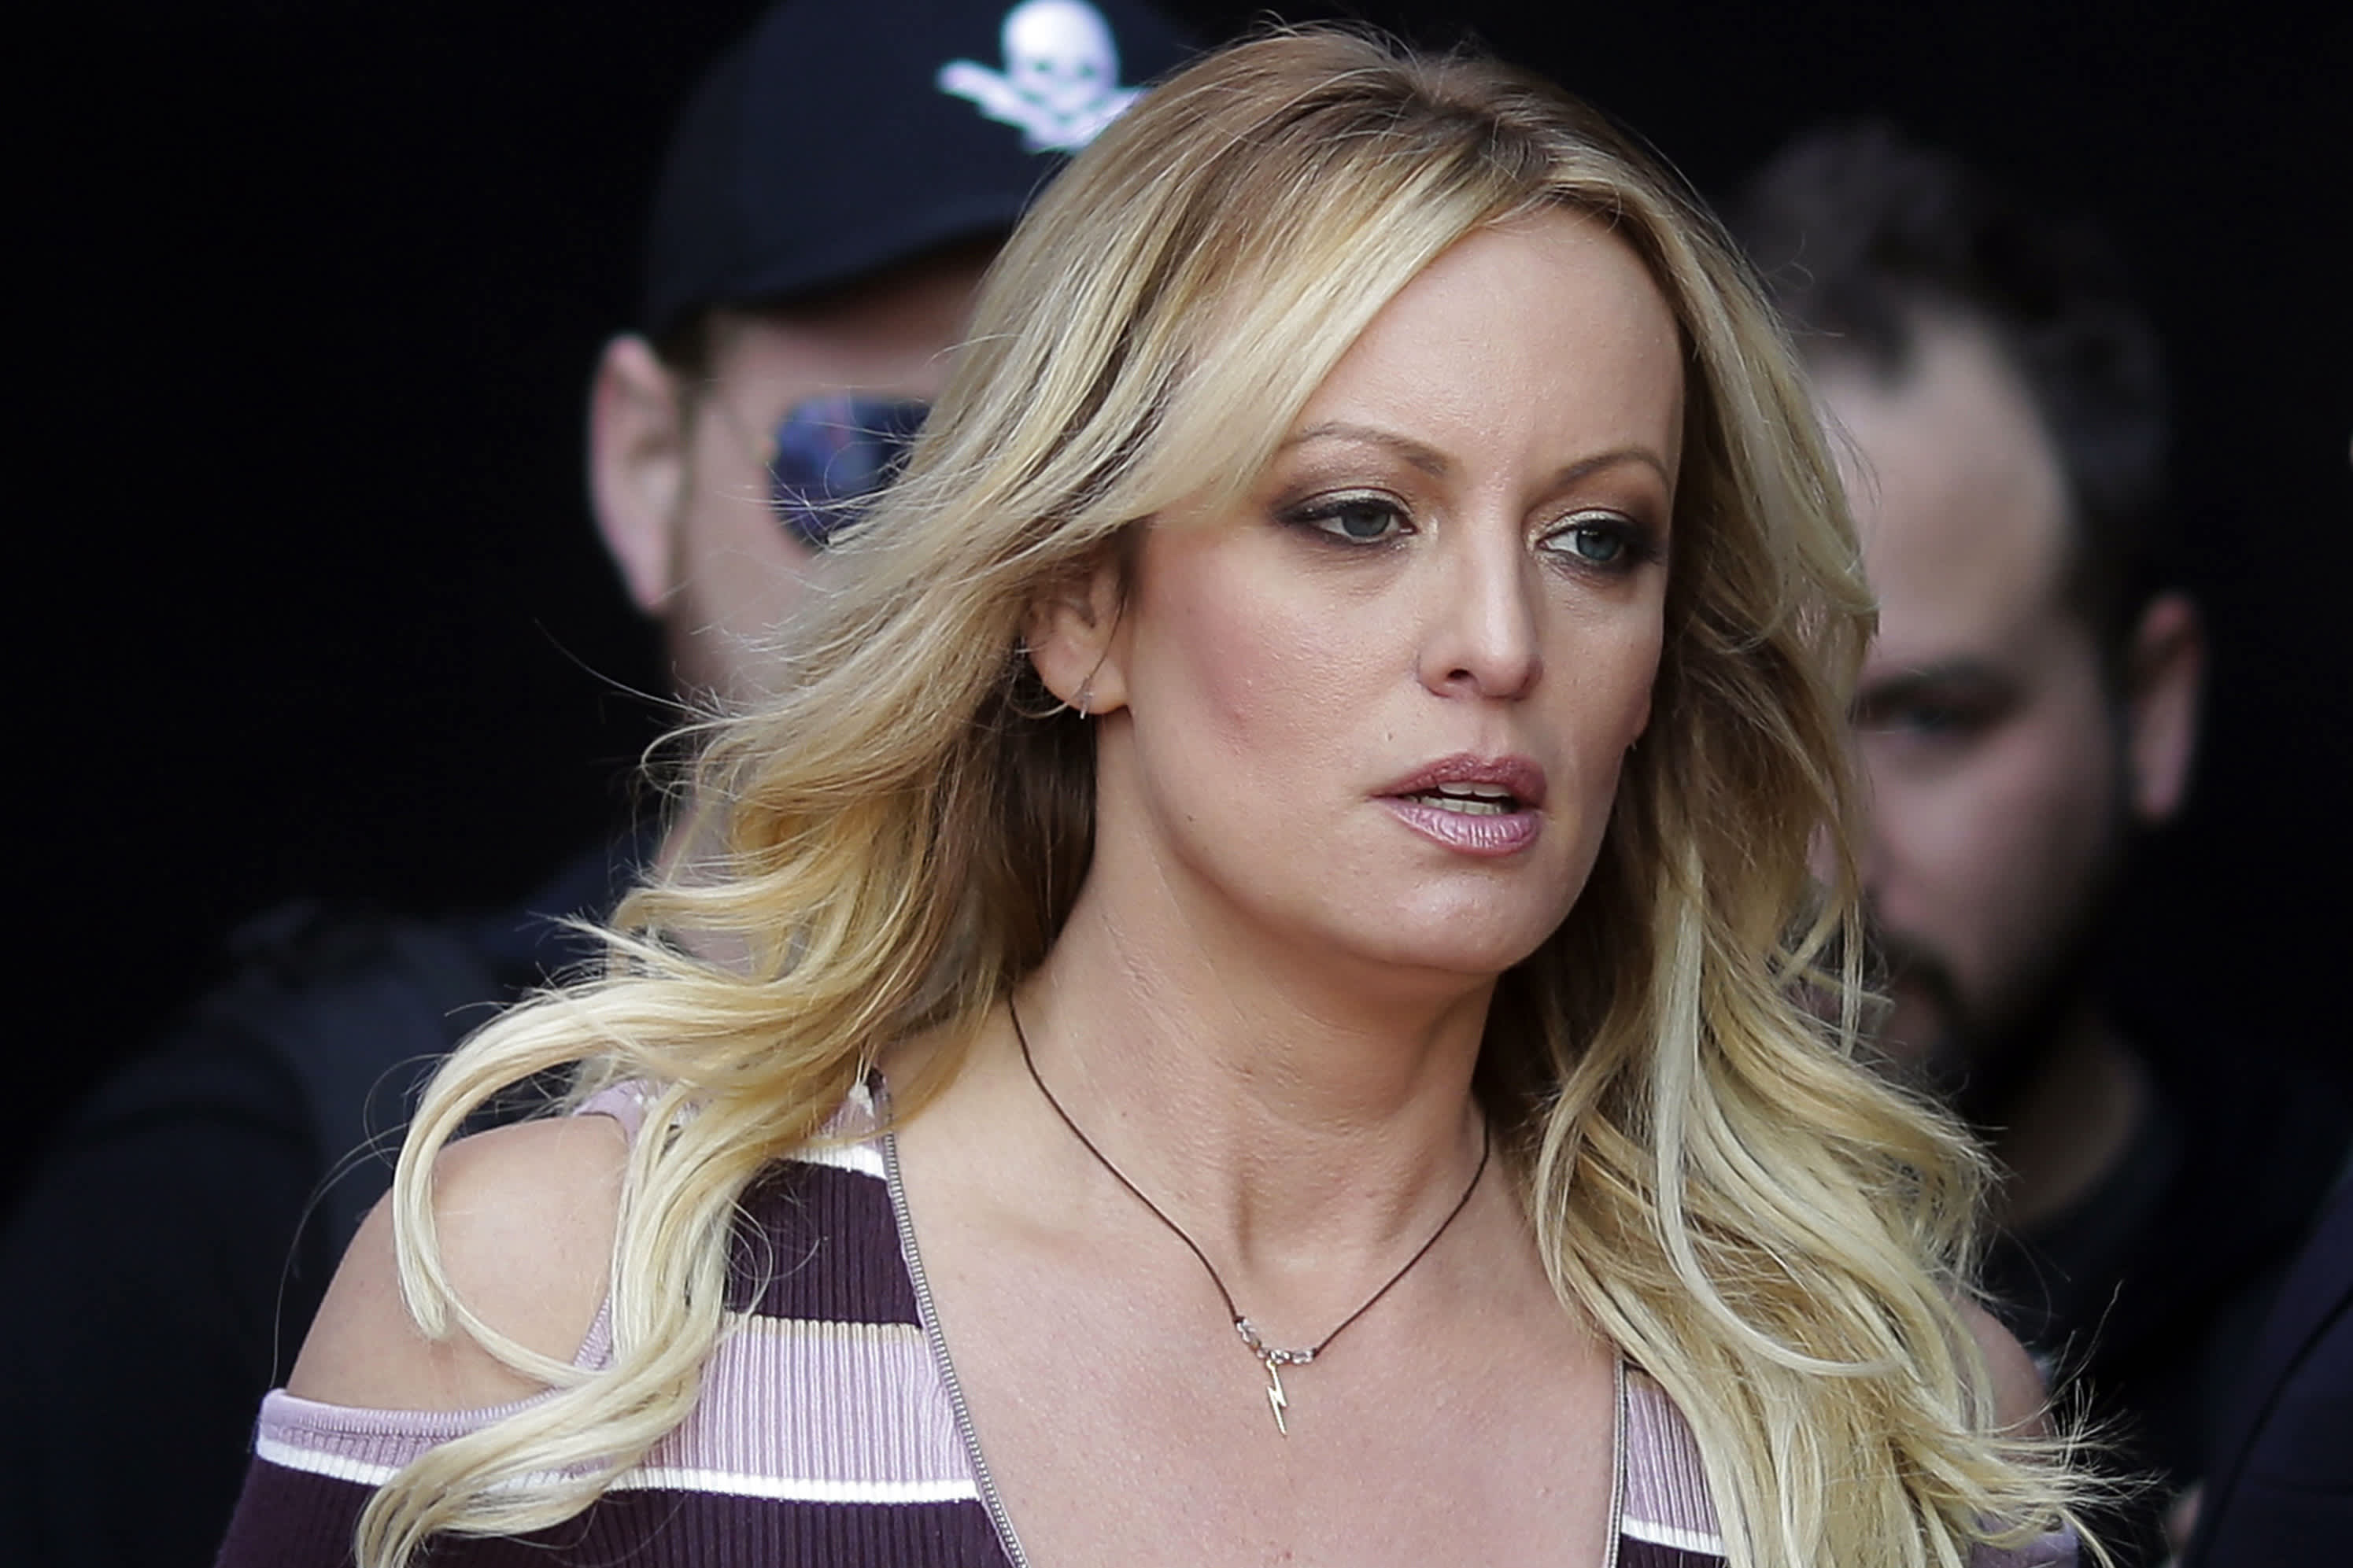 Trump probe: Porn star Stormy Daniels says she'll dance if he's jailed